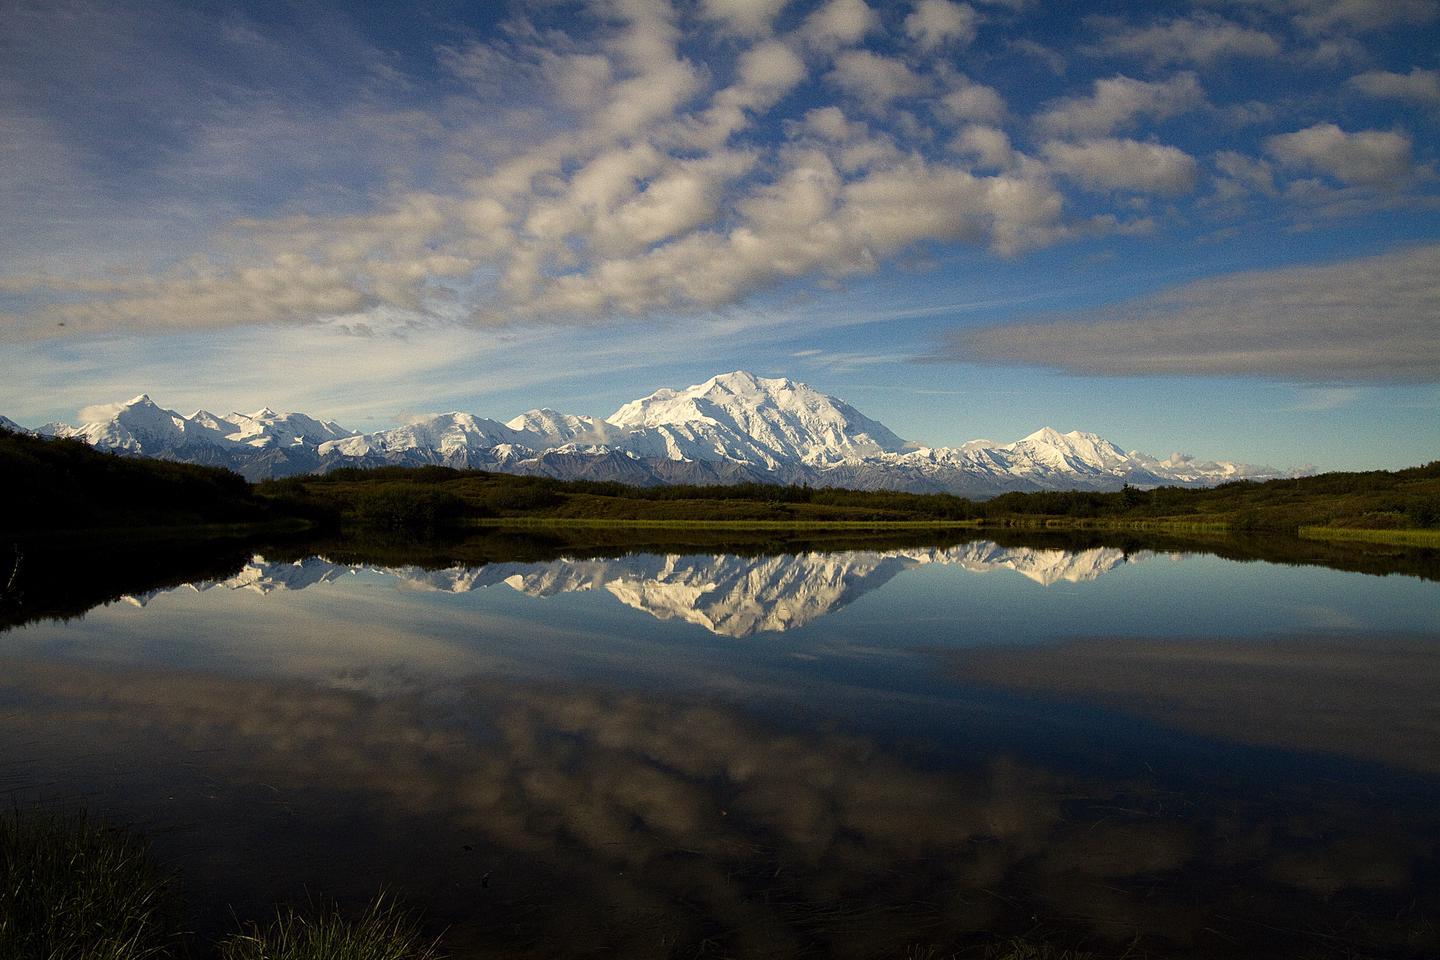 Denali and Reflection PondDenali is the highest mountain in North America